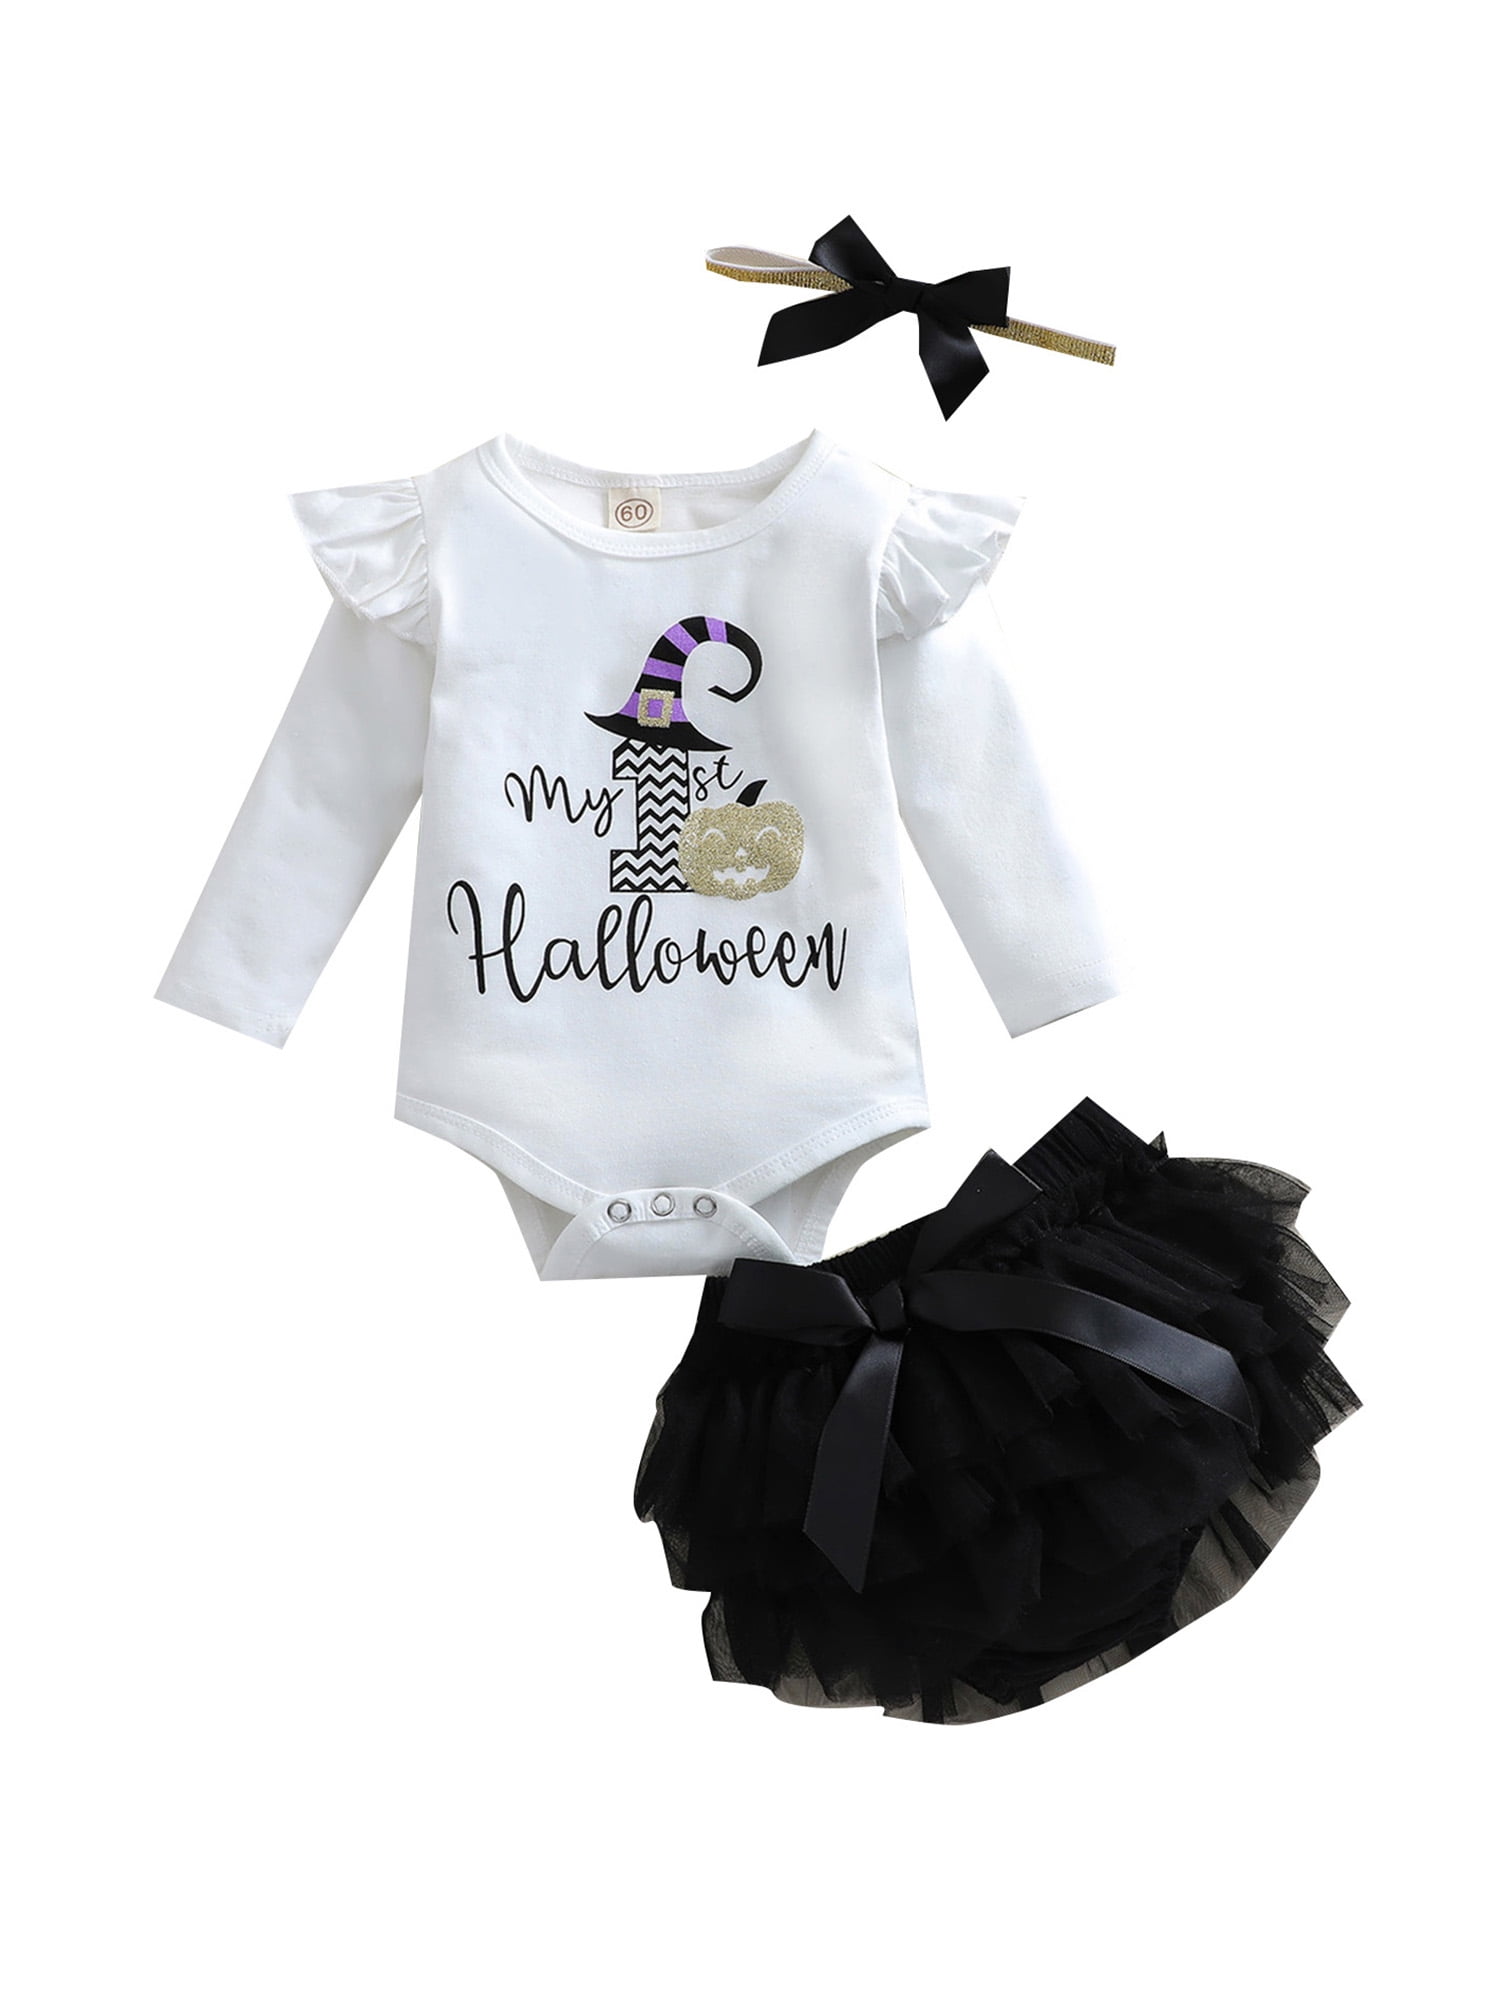 Details about   Newborn Baby Girls Romper Dress Princess Fancy Outfits Costume Sleeves Bodysuits 